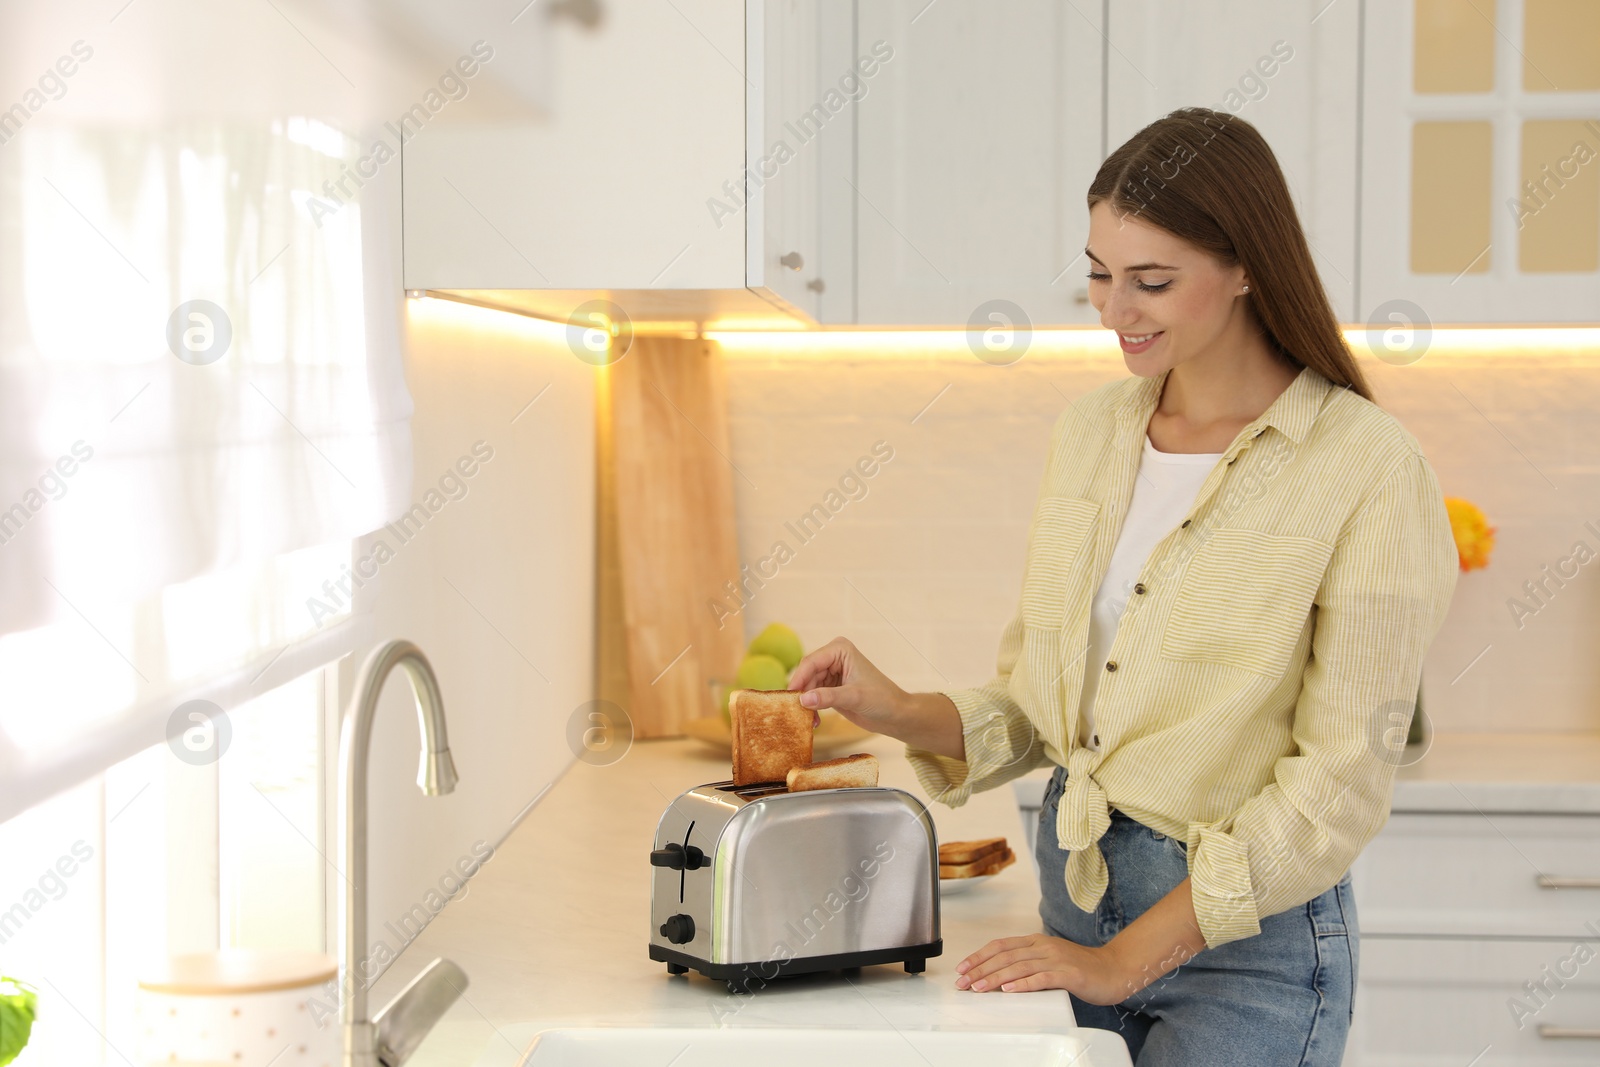 Photo of Young woman taking slice of bread from toaster in kitchen